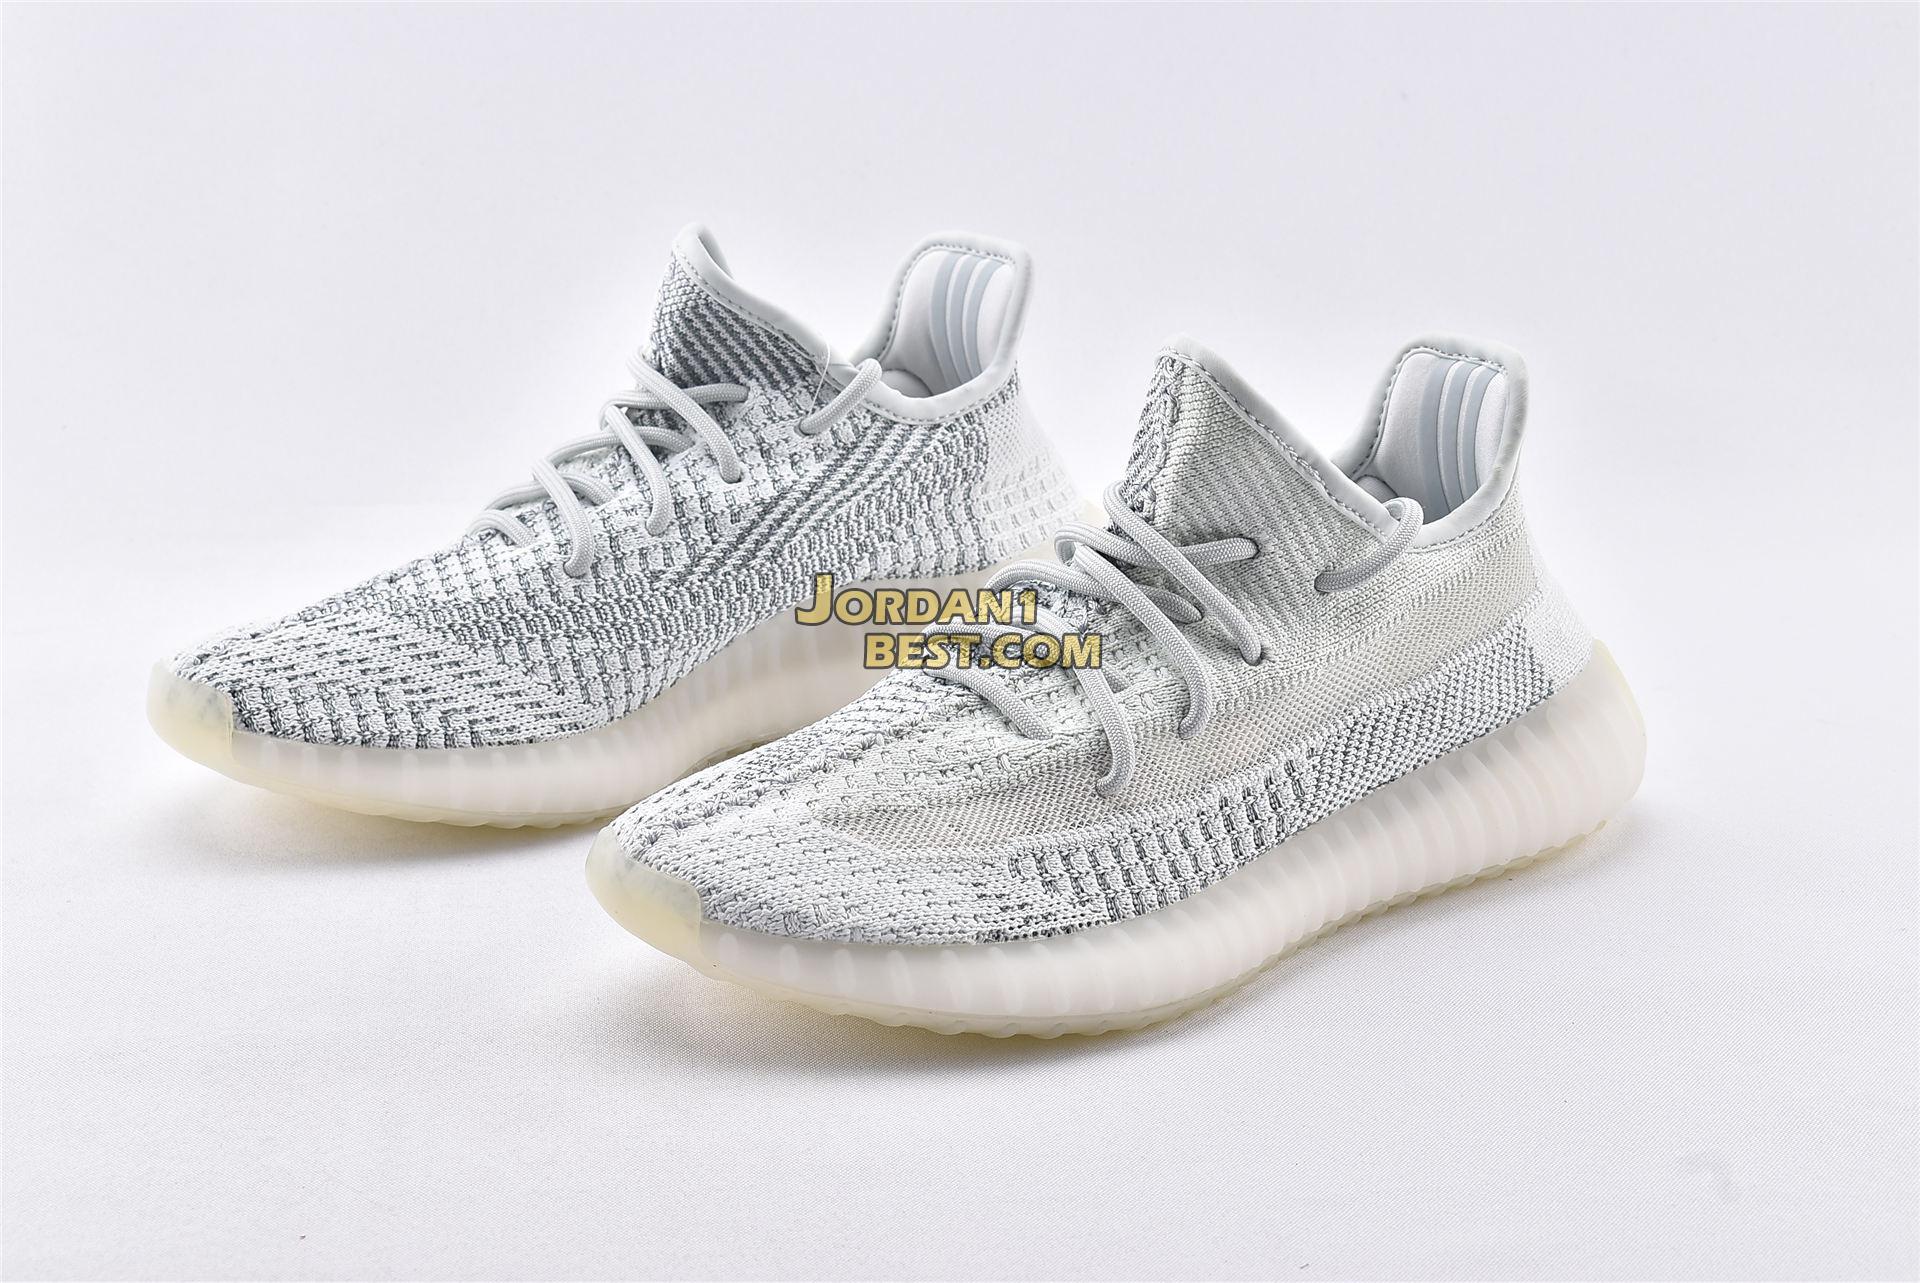 Adidas Yeezy Boost 350 V2 "Cloud White Reflective" FW5317